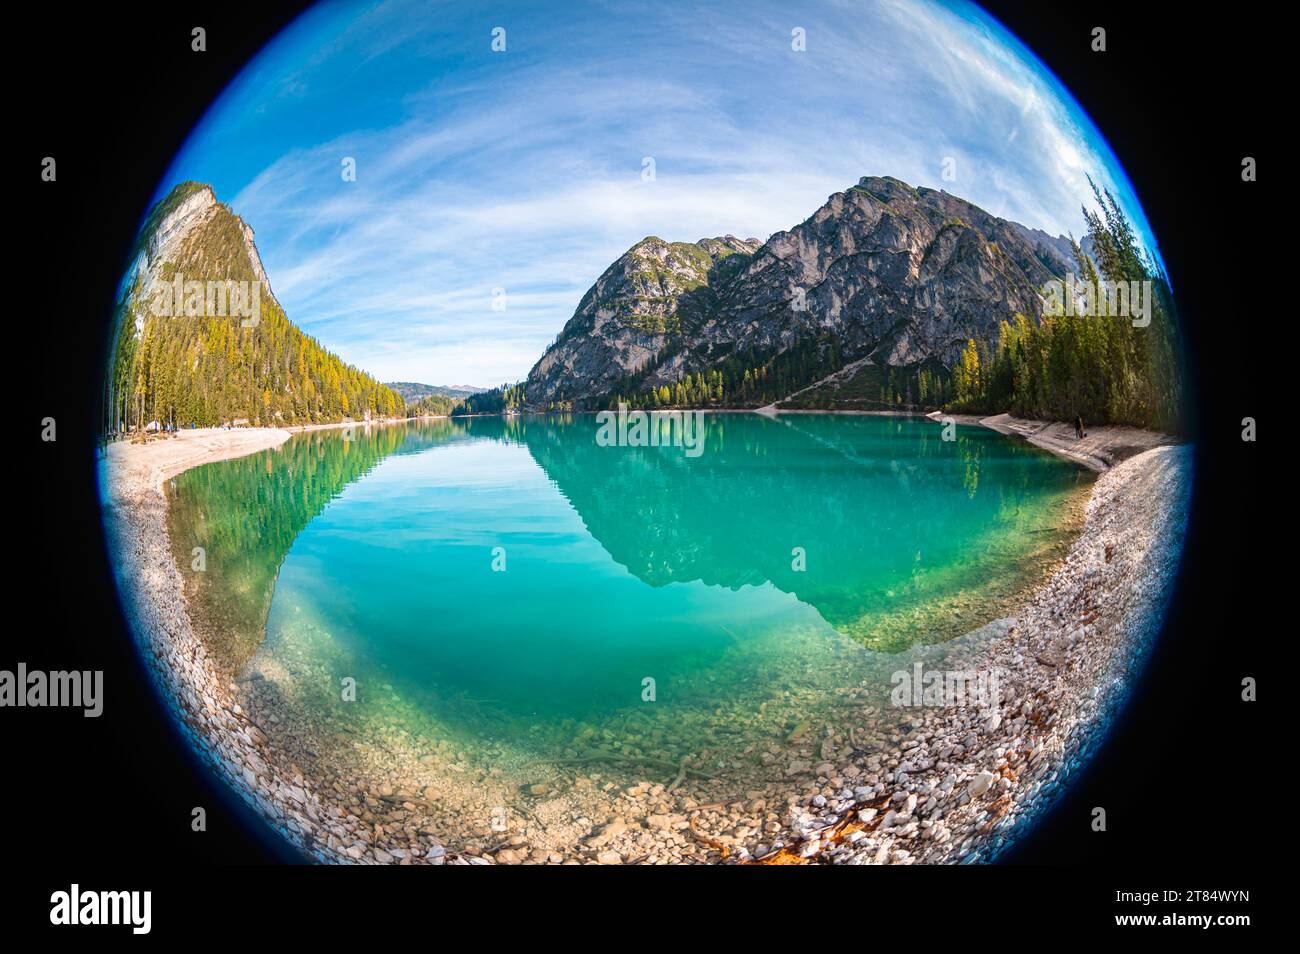 Fish eye view of turquoise colored Lake Braies in Italy's dolomite mountains. Stock Photo